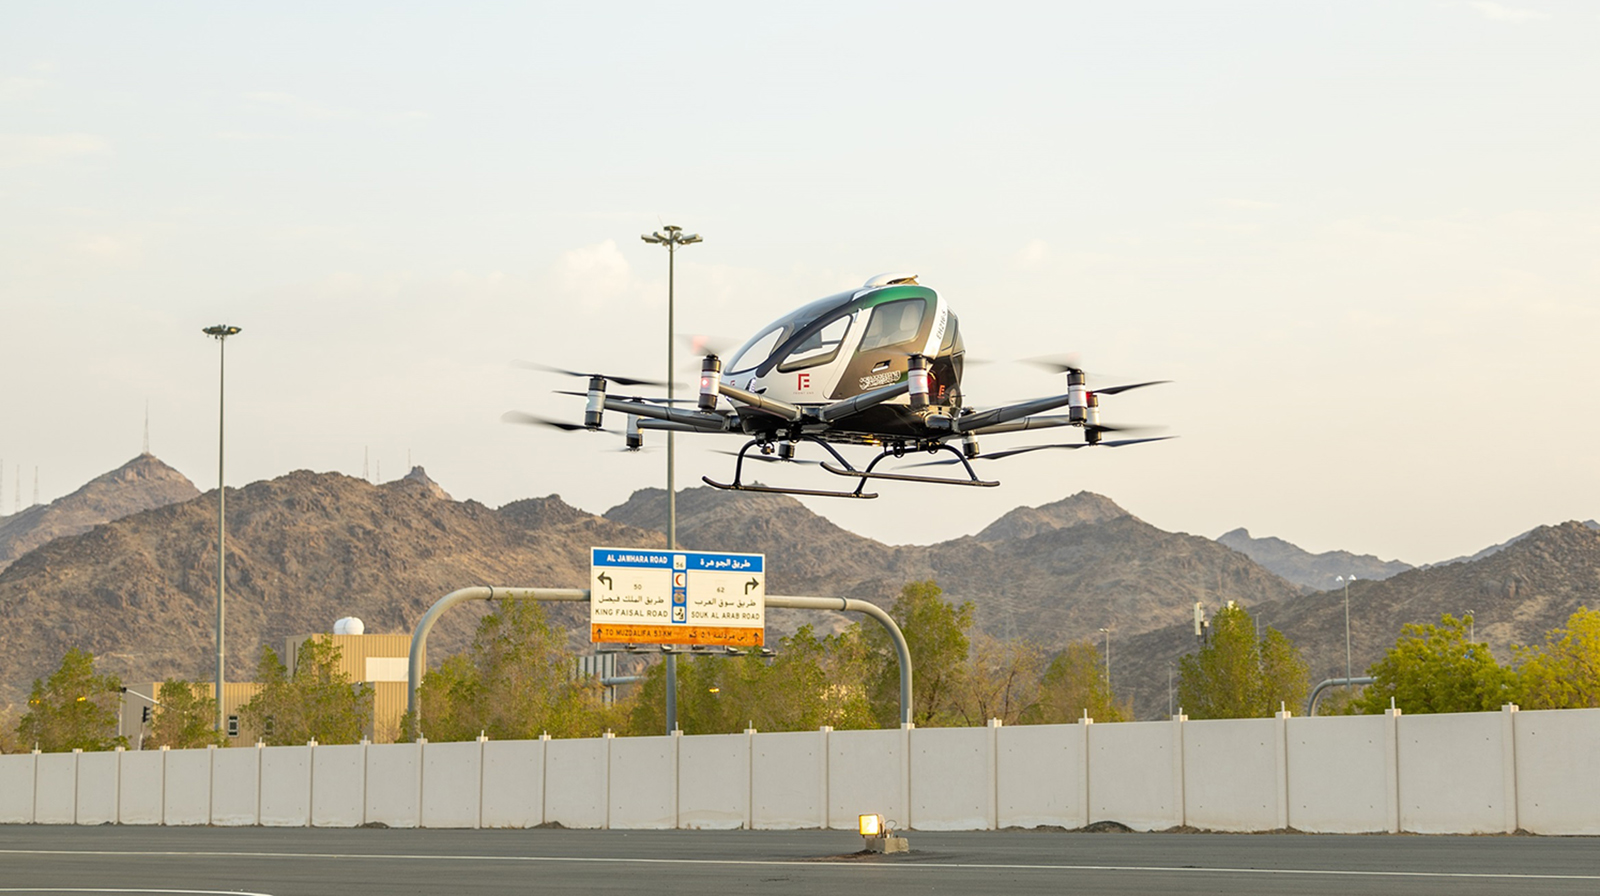 The first Air Taxi test is pictured underway in Saudi Arabia